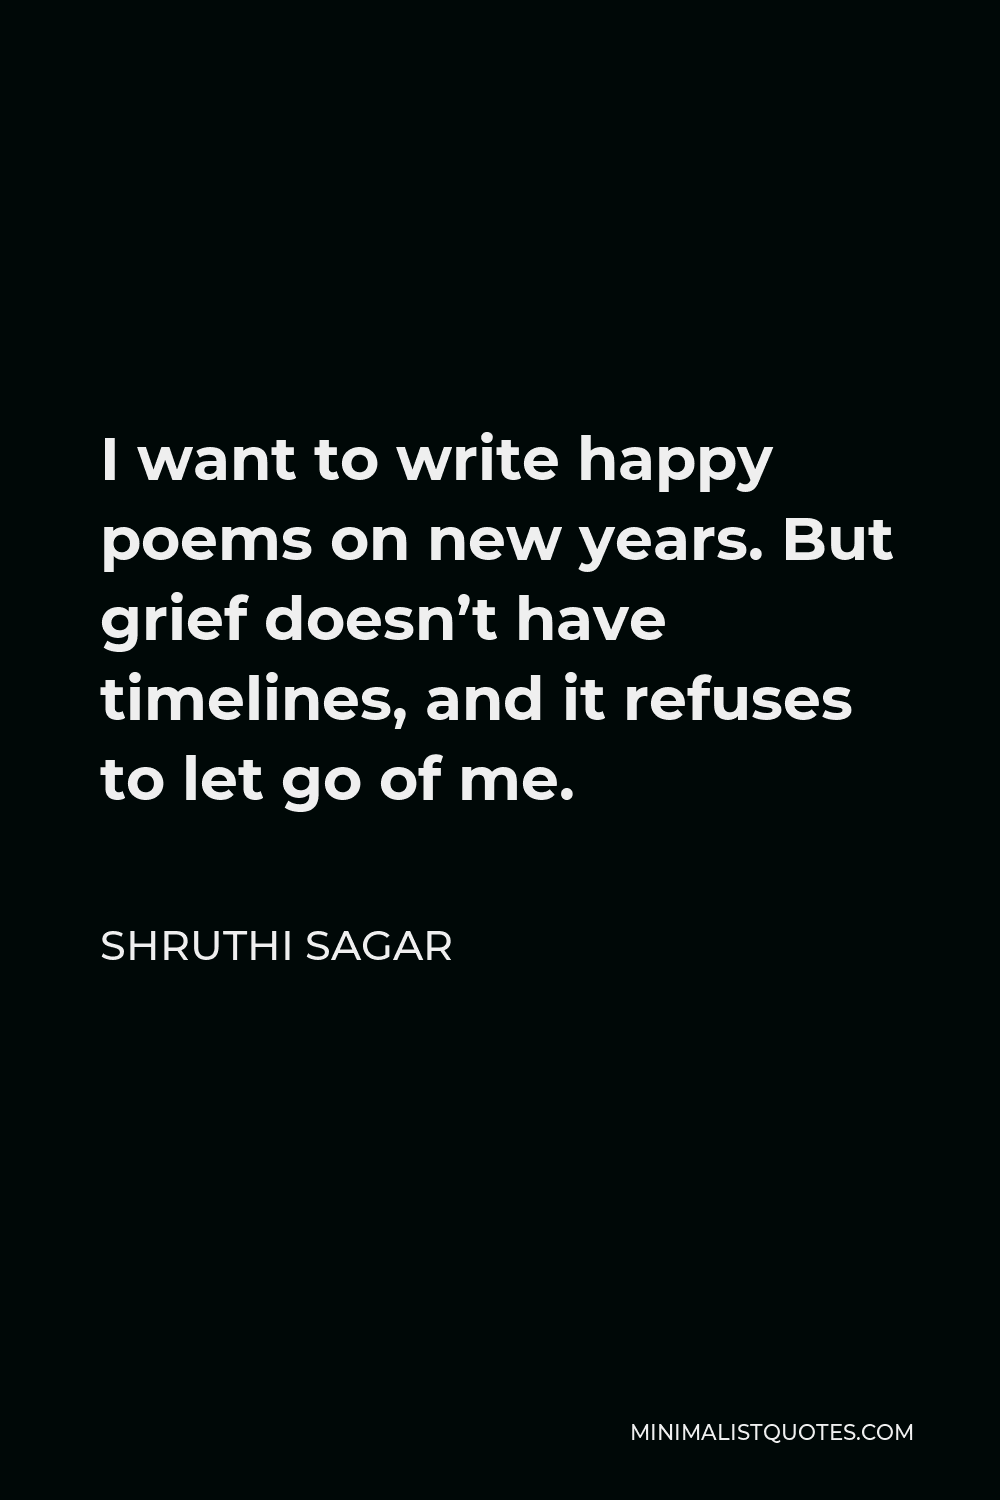 Shruthi Sagar Quote - I want to write happy poems on new years. But grief doesn’t have timelines, and it refuses to let go of me.